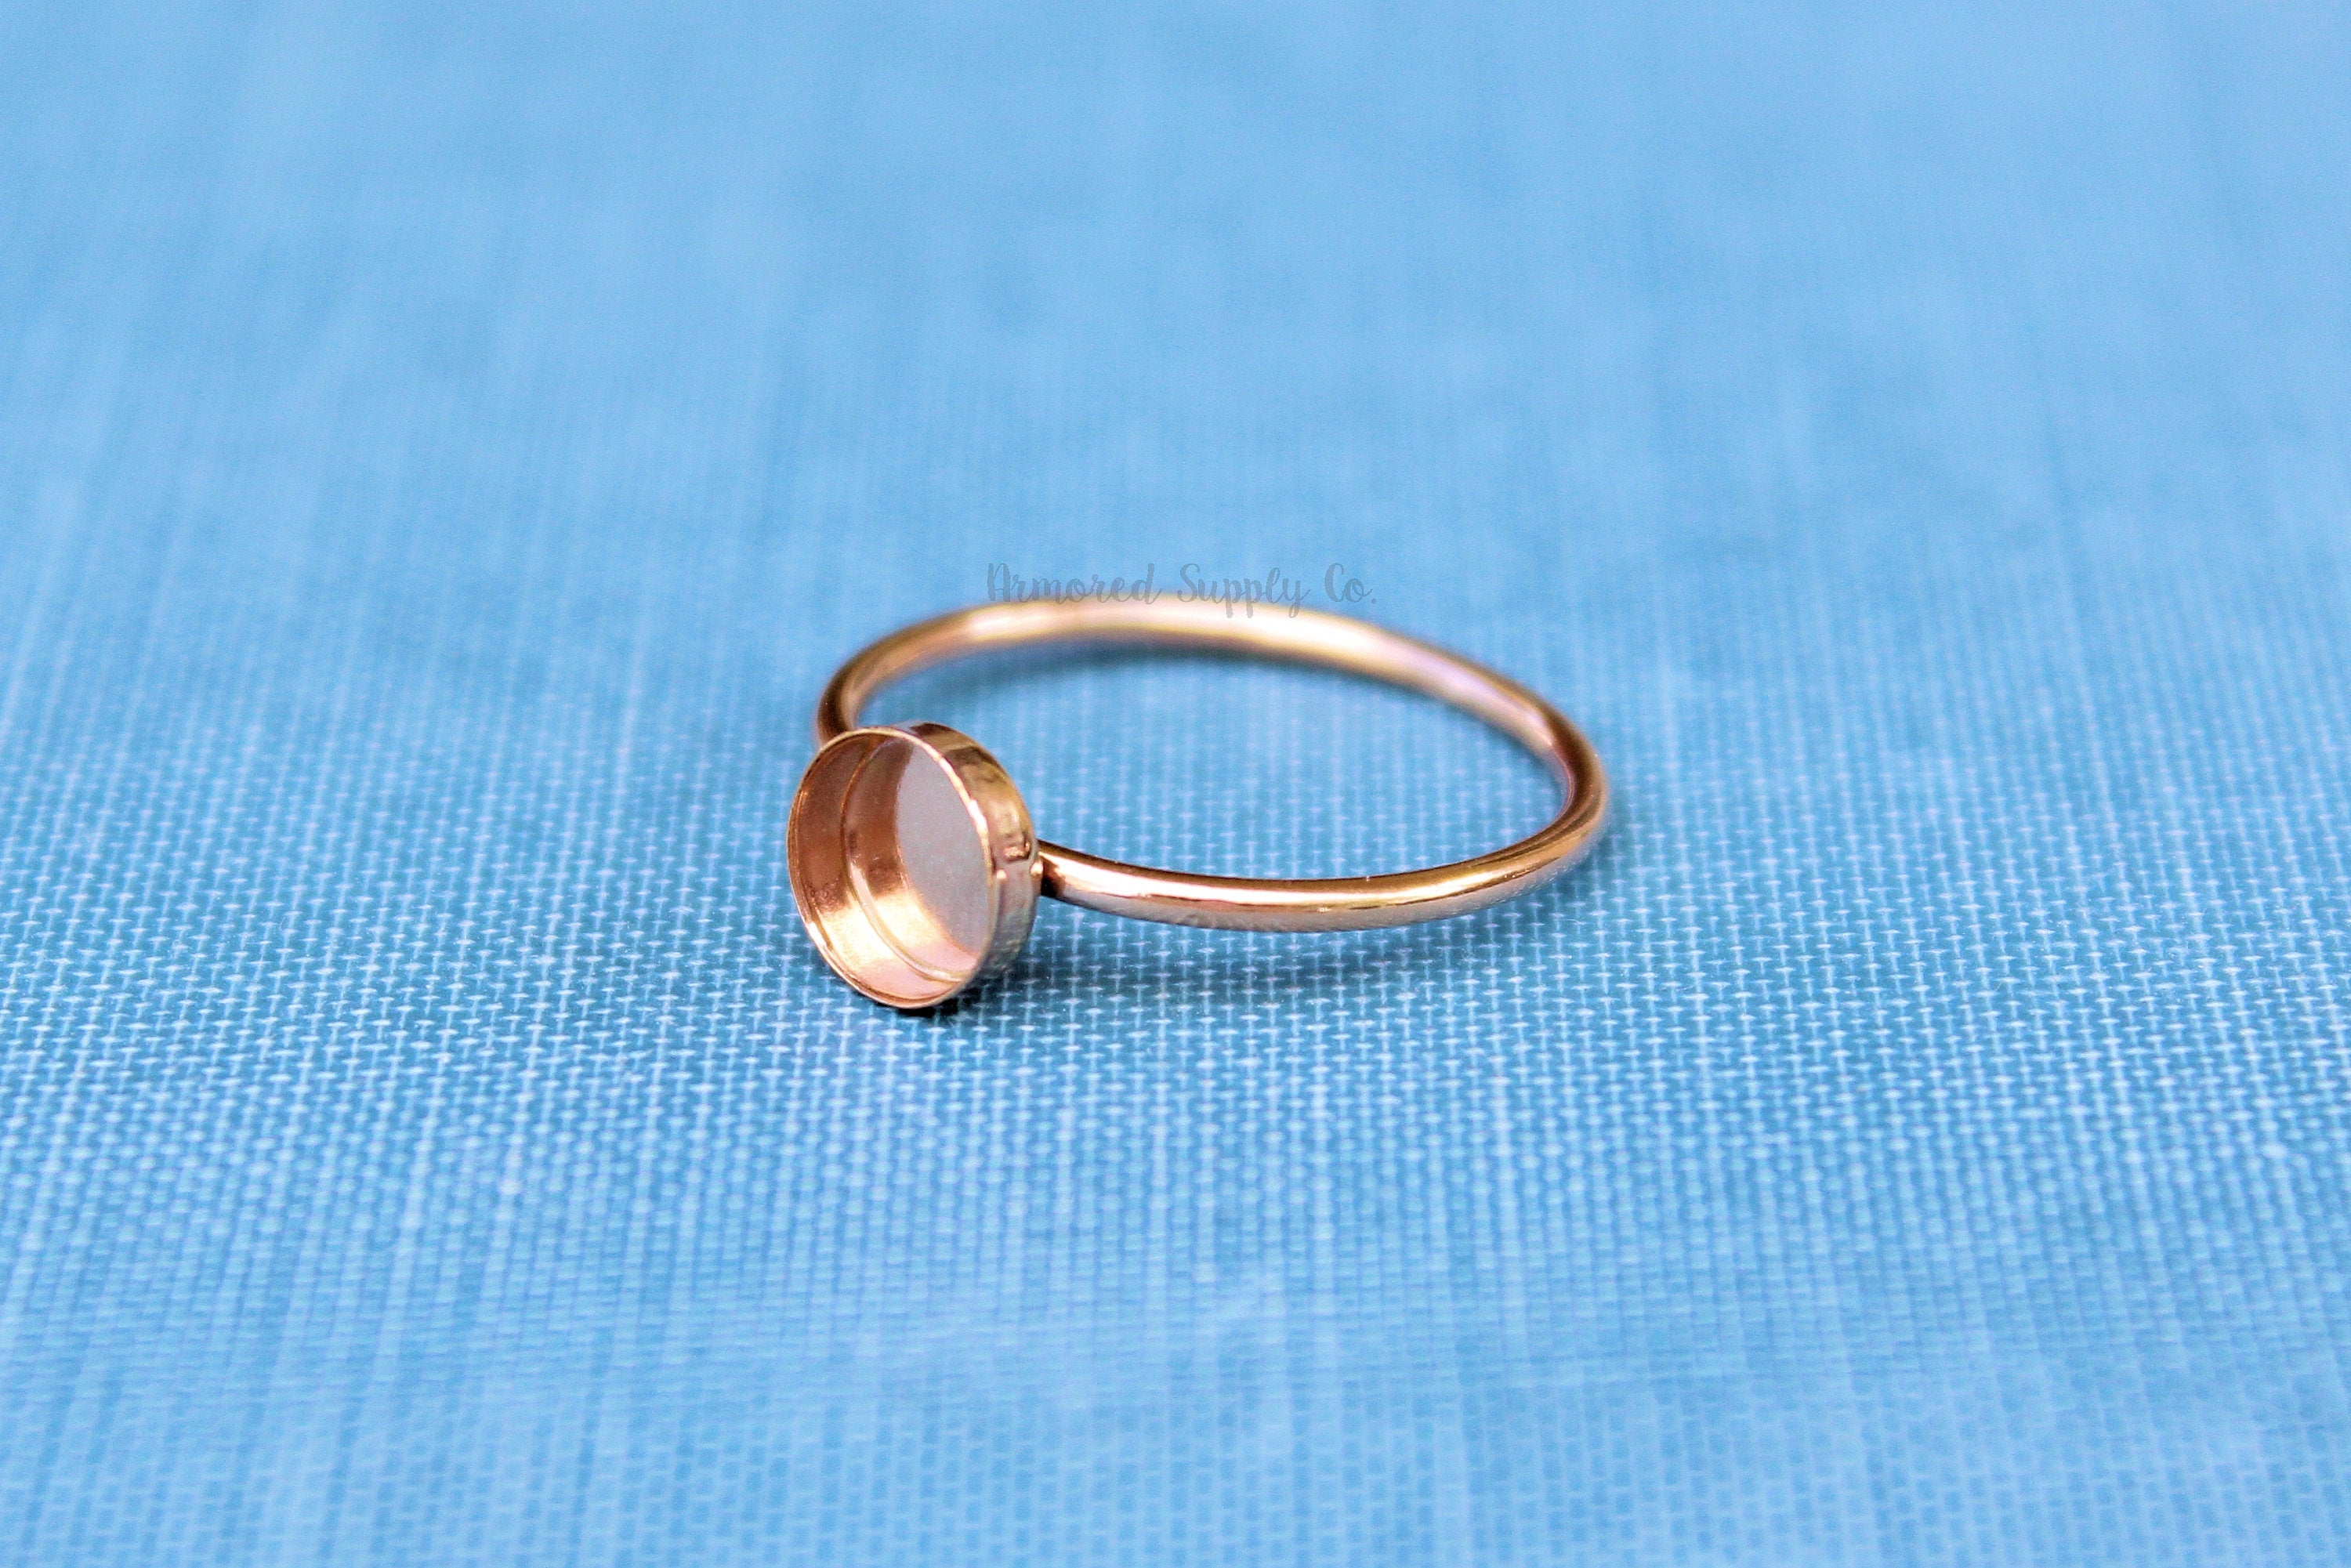 Rose Gold Filled 4mm Bezel Cup Ring blank, Round Cabochon, Breast Milk, DIY jewelry supplies, build your ring, wholesale jewelry, diy ring